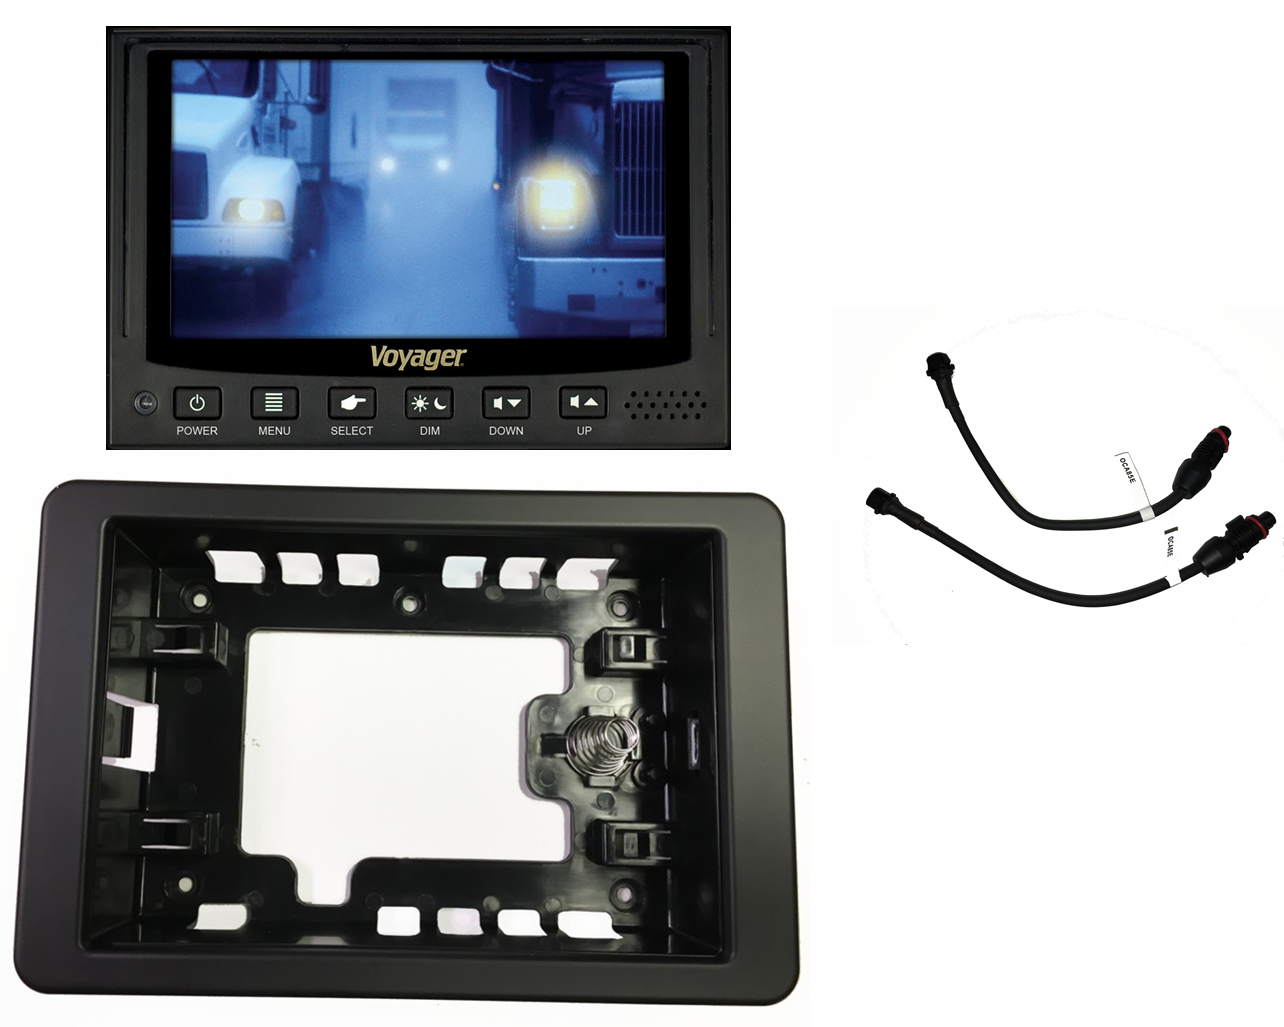 VOM783CT-kit -- A Kit to Install Heavy-Duty Voyager 7" Color Monitor in place of VOM783CT.